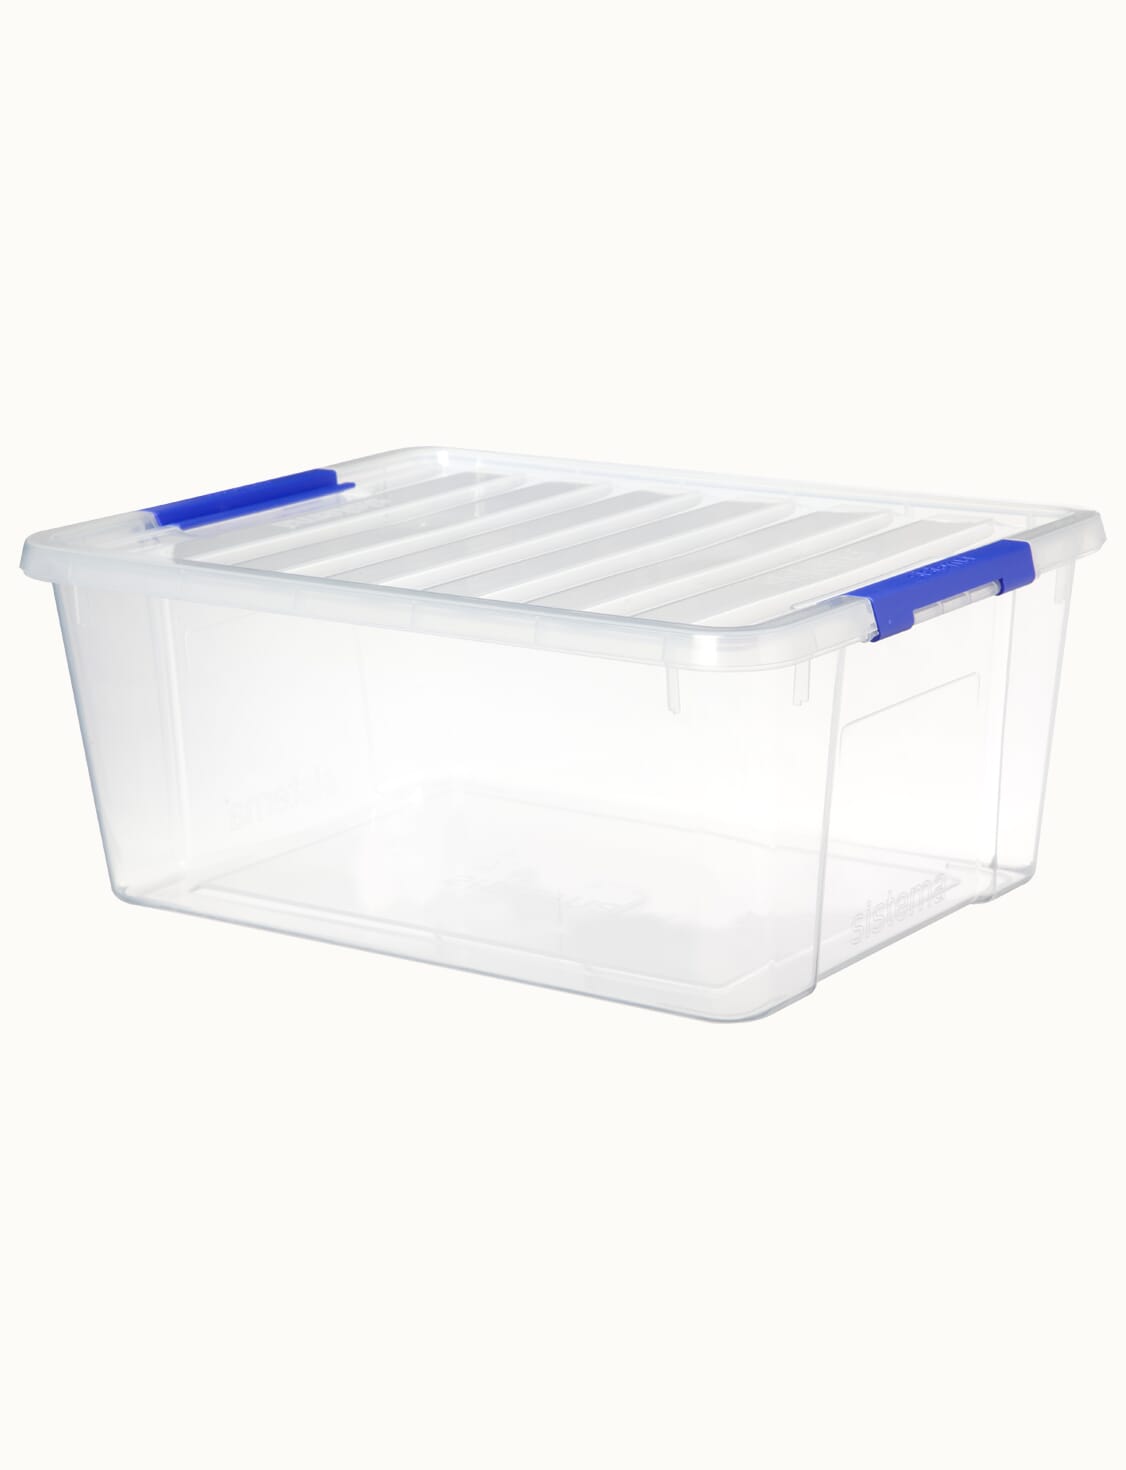 Clear Light Blue Plastic Multipurpose Handled Storage Box w/Removable Tray